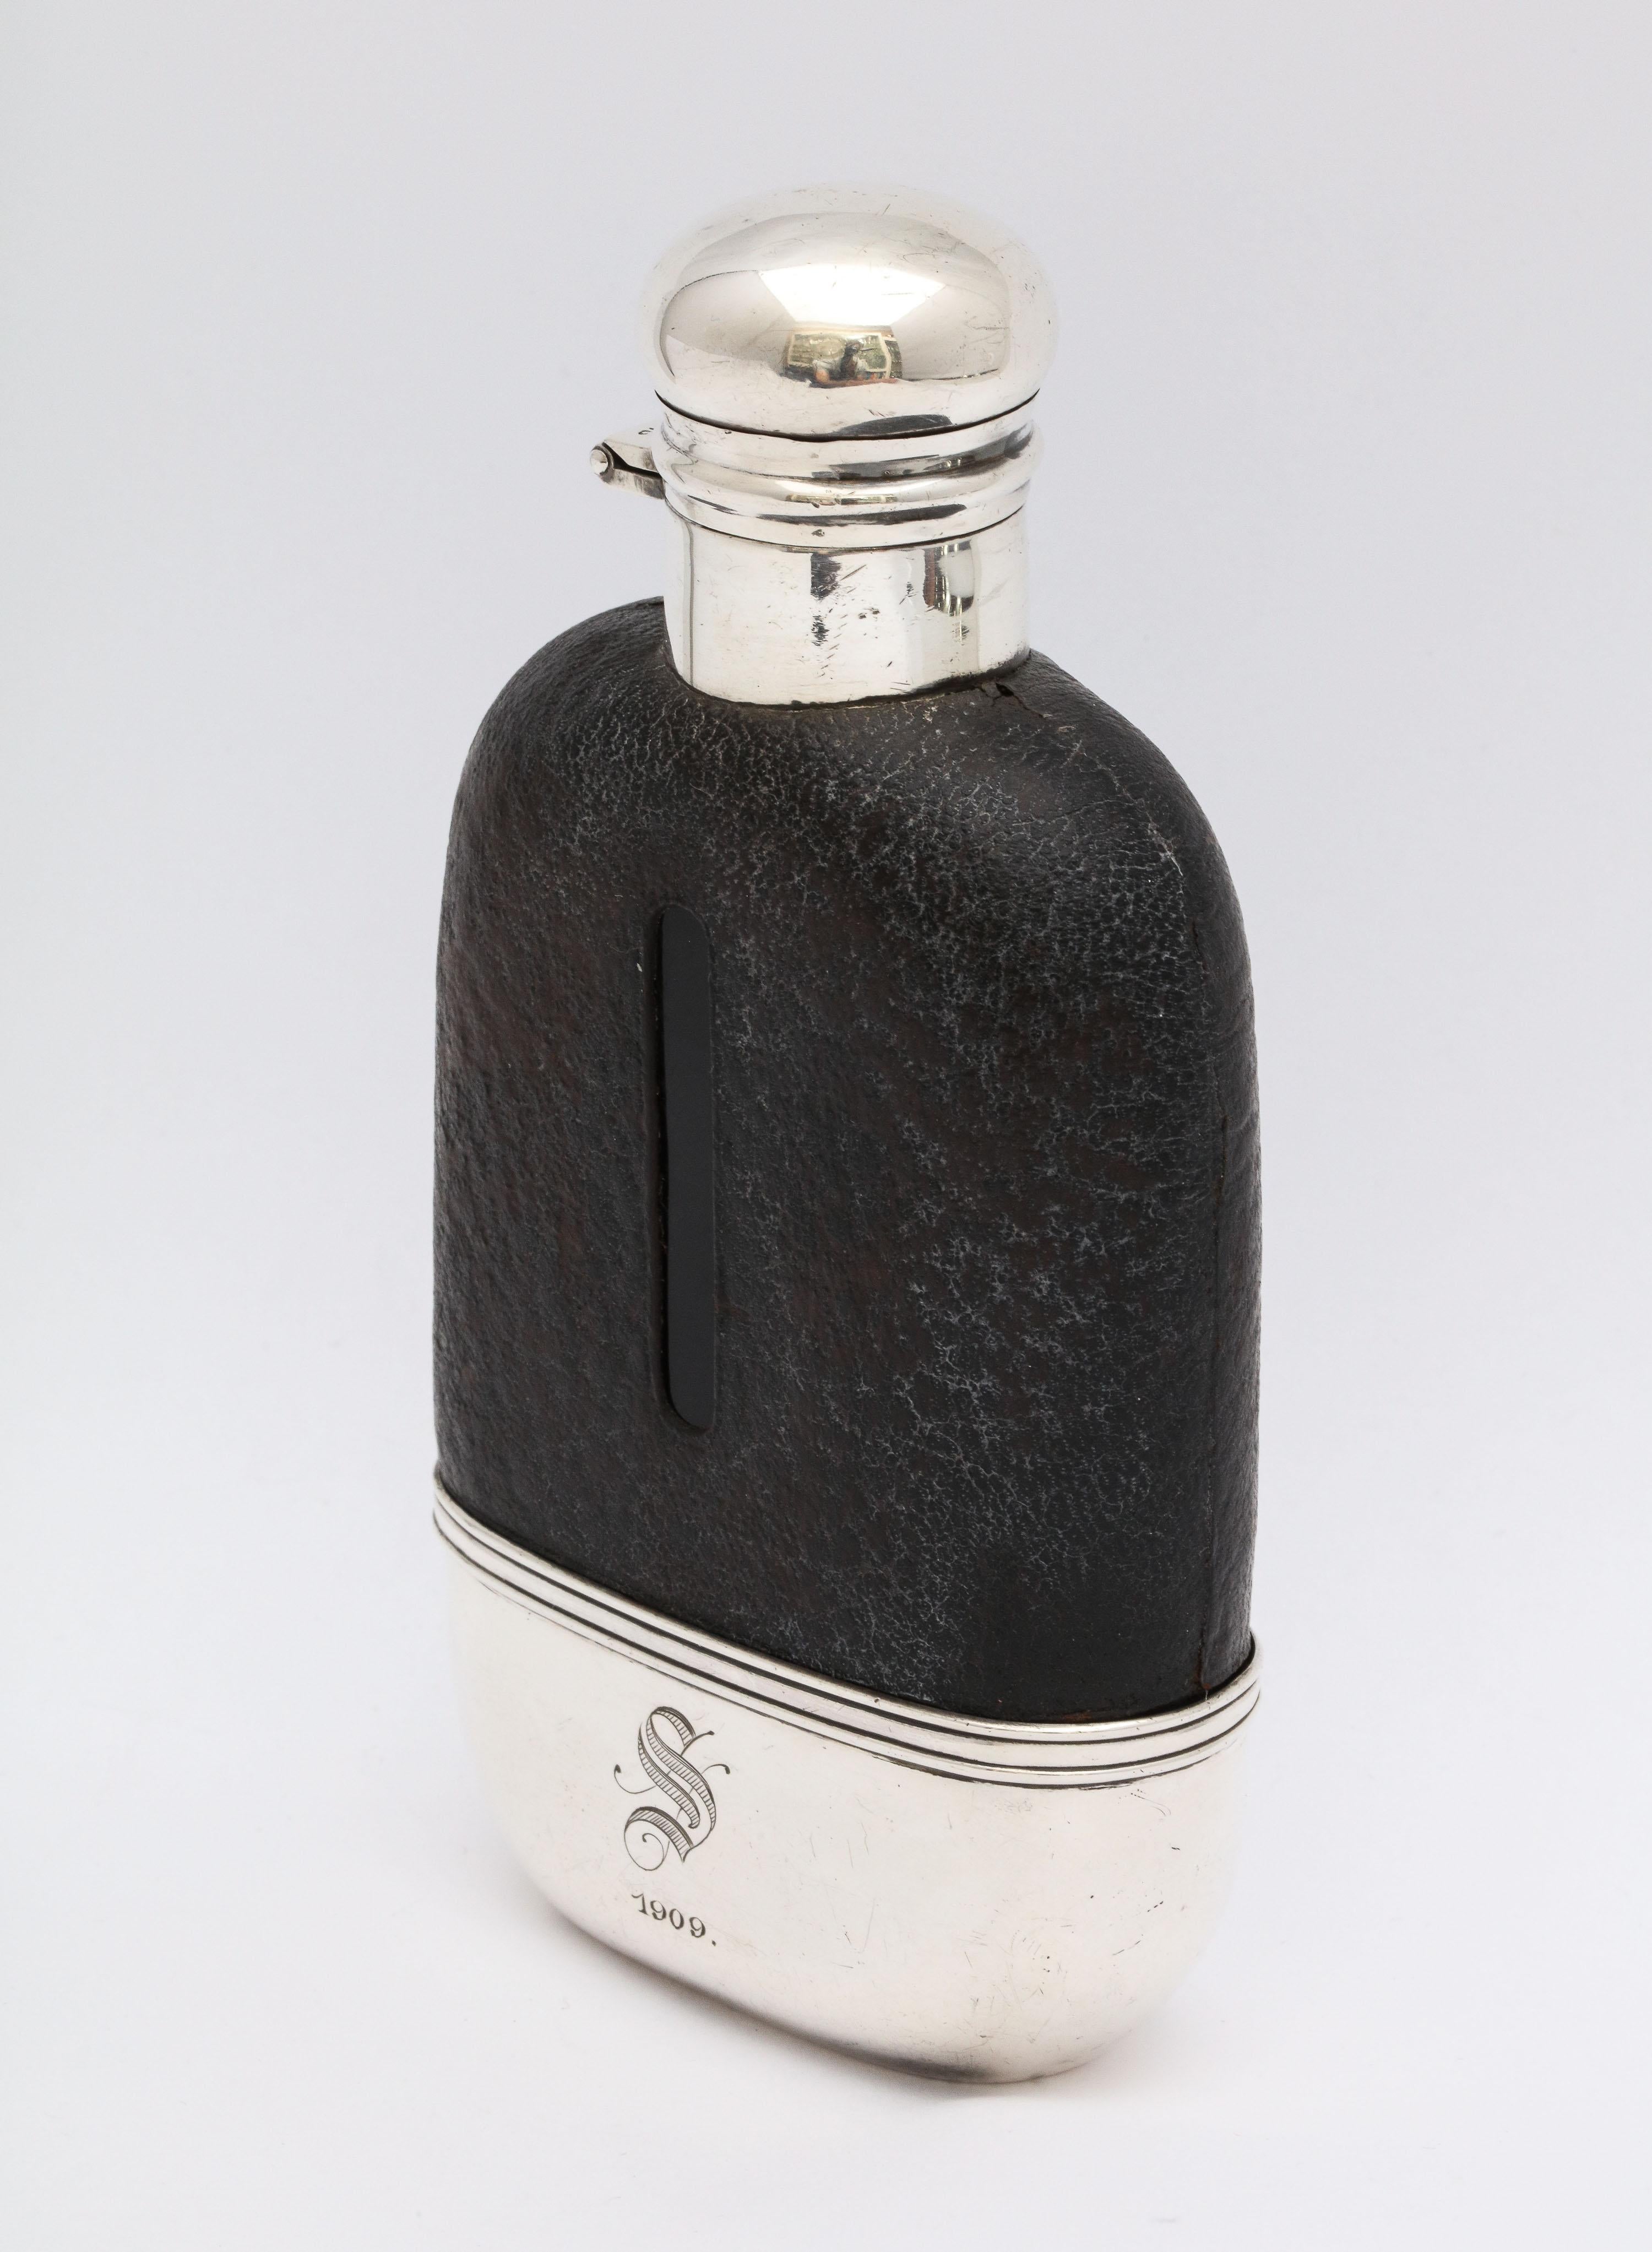 Edwardian period, sterling silver and leather-mounted glass flask, The Alvin Corp., Providence, Rhode Island, 1908. Bottom of flask, the inside of which is gilded, is removable and can be used as a drinking cup. It is monogrammed with an Old English